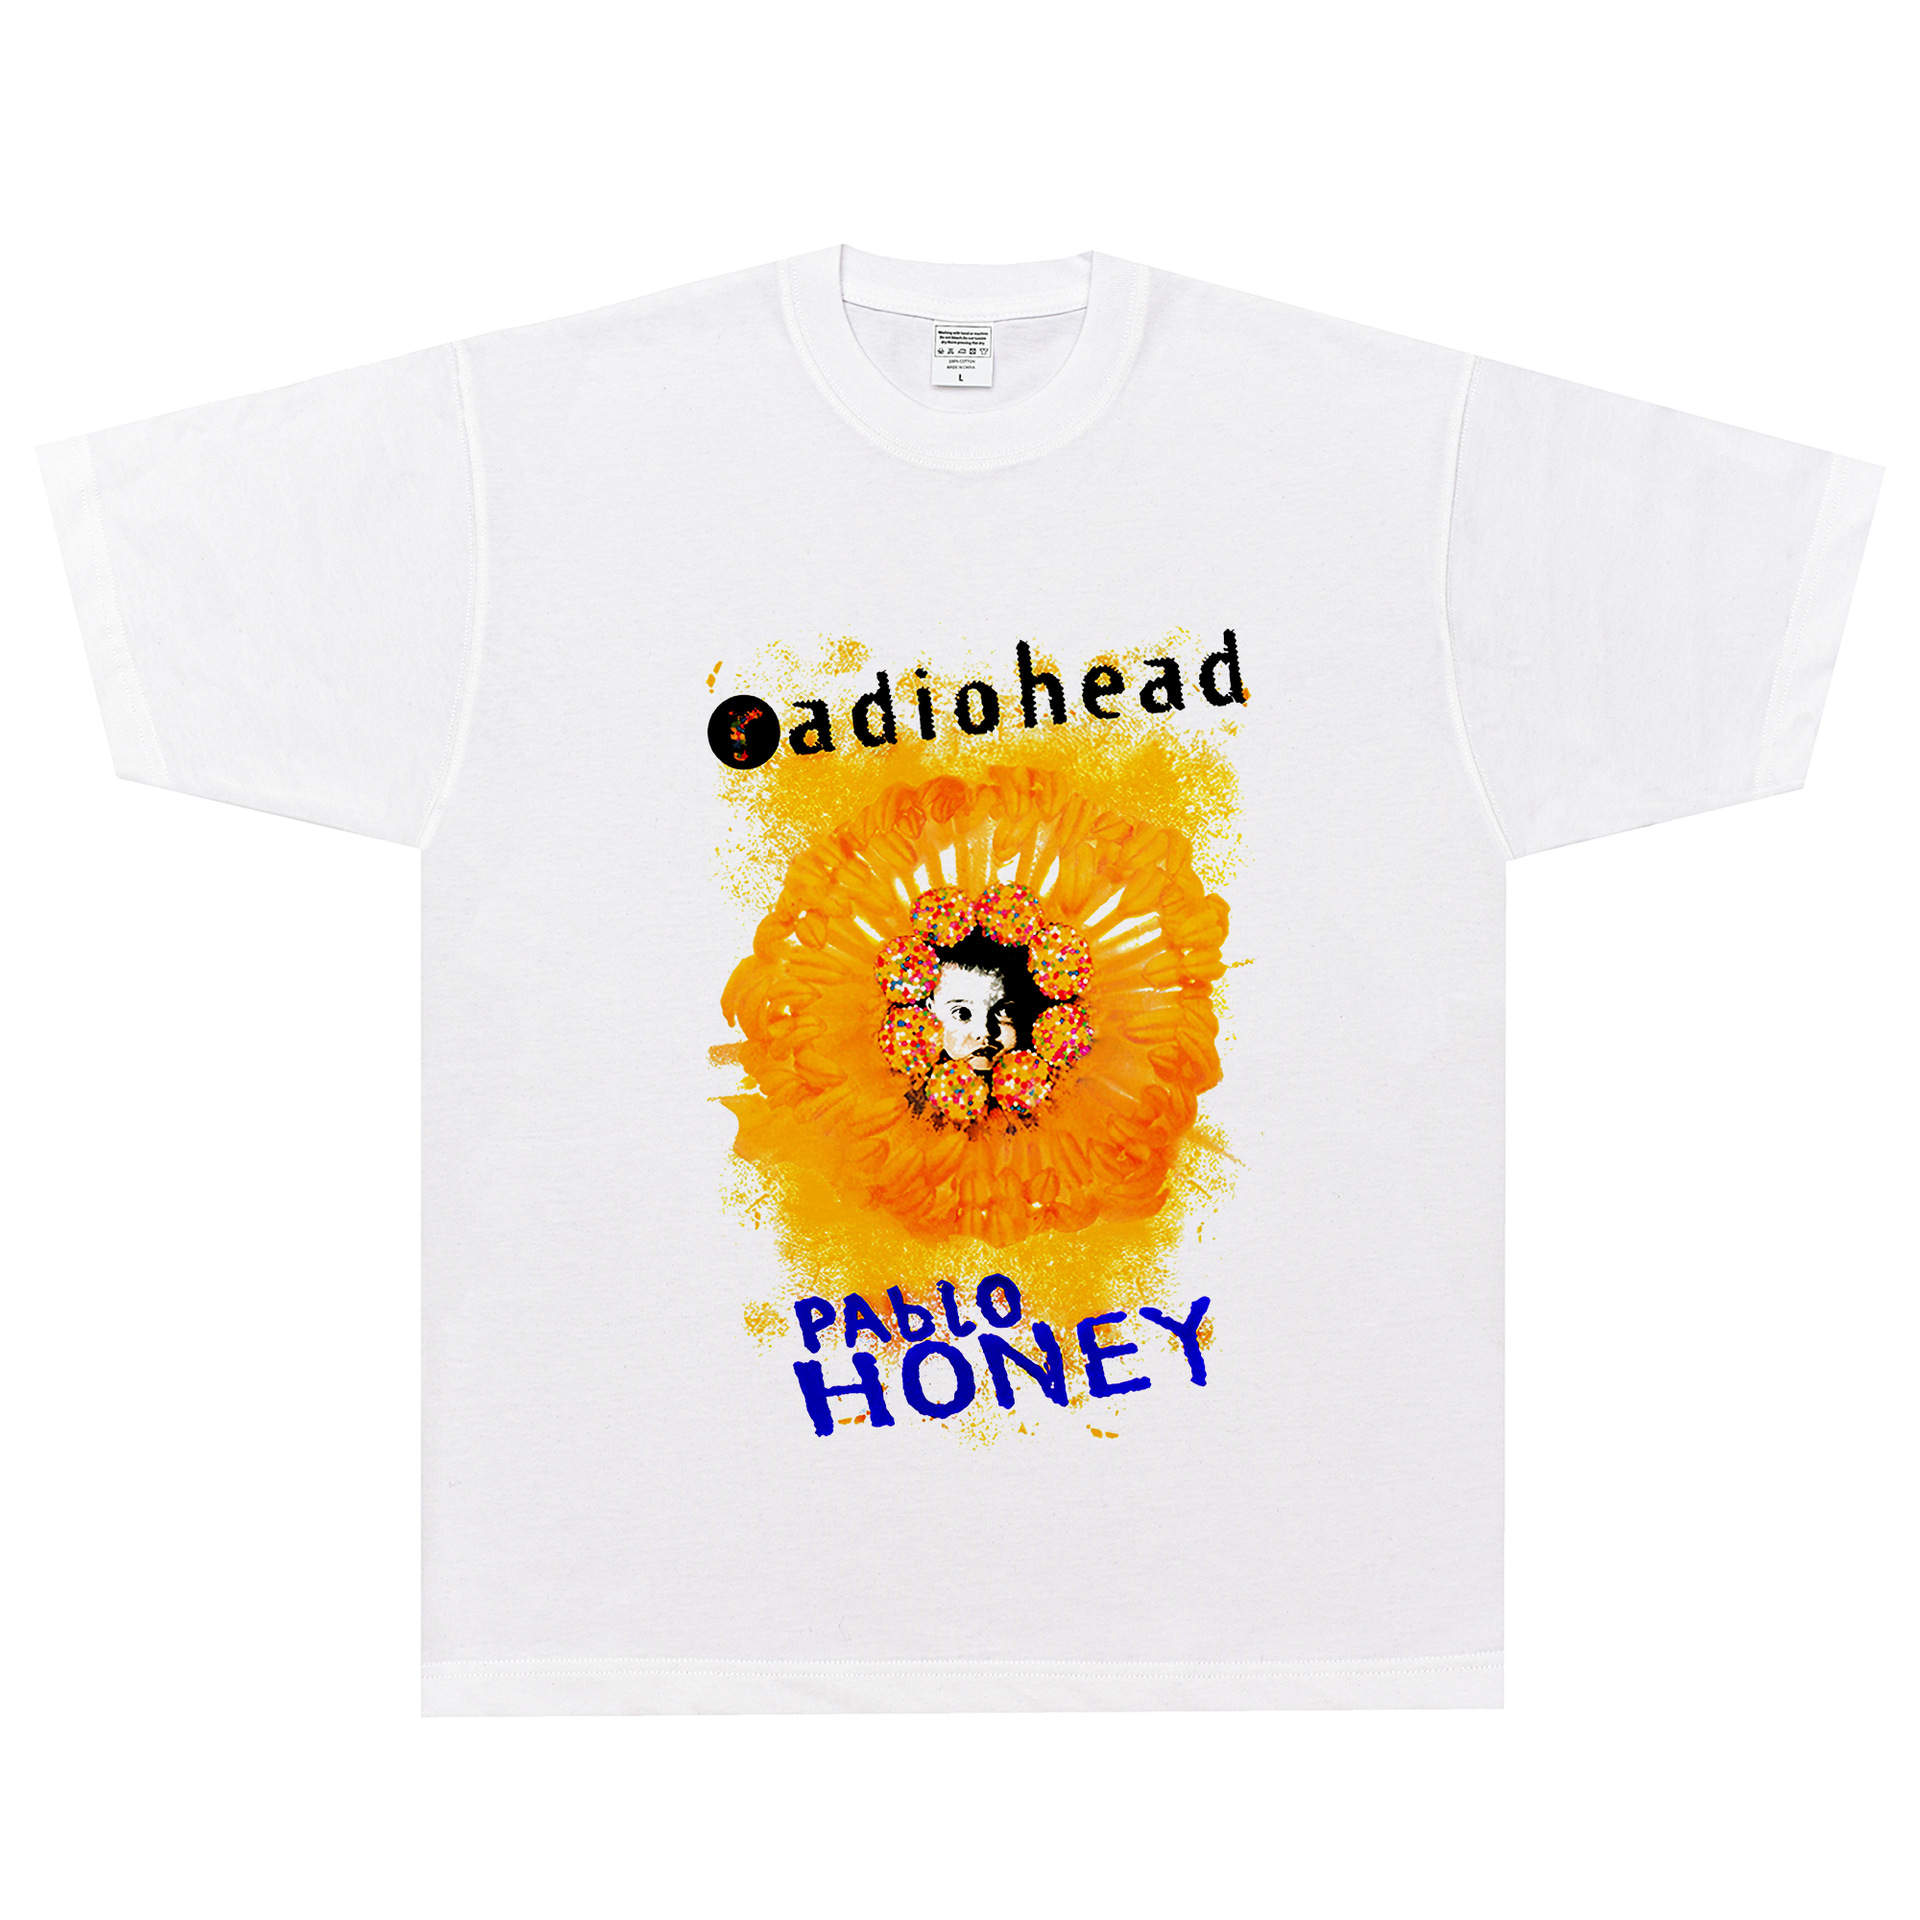 Breathable Soft Radiohead Pablo Honey T-shirt For Men And Women 